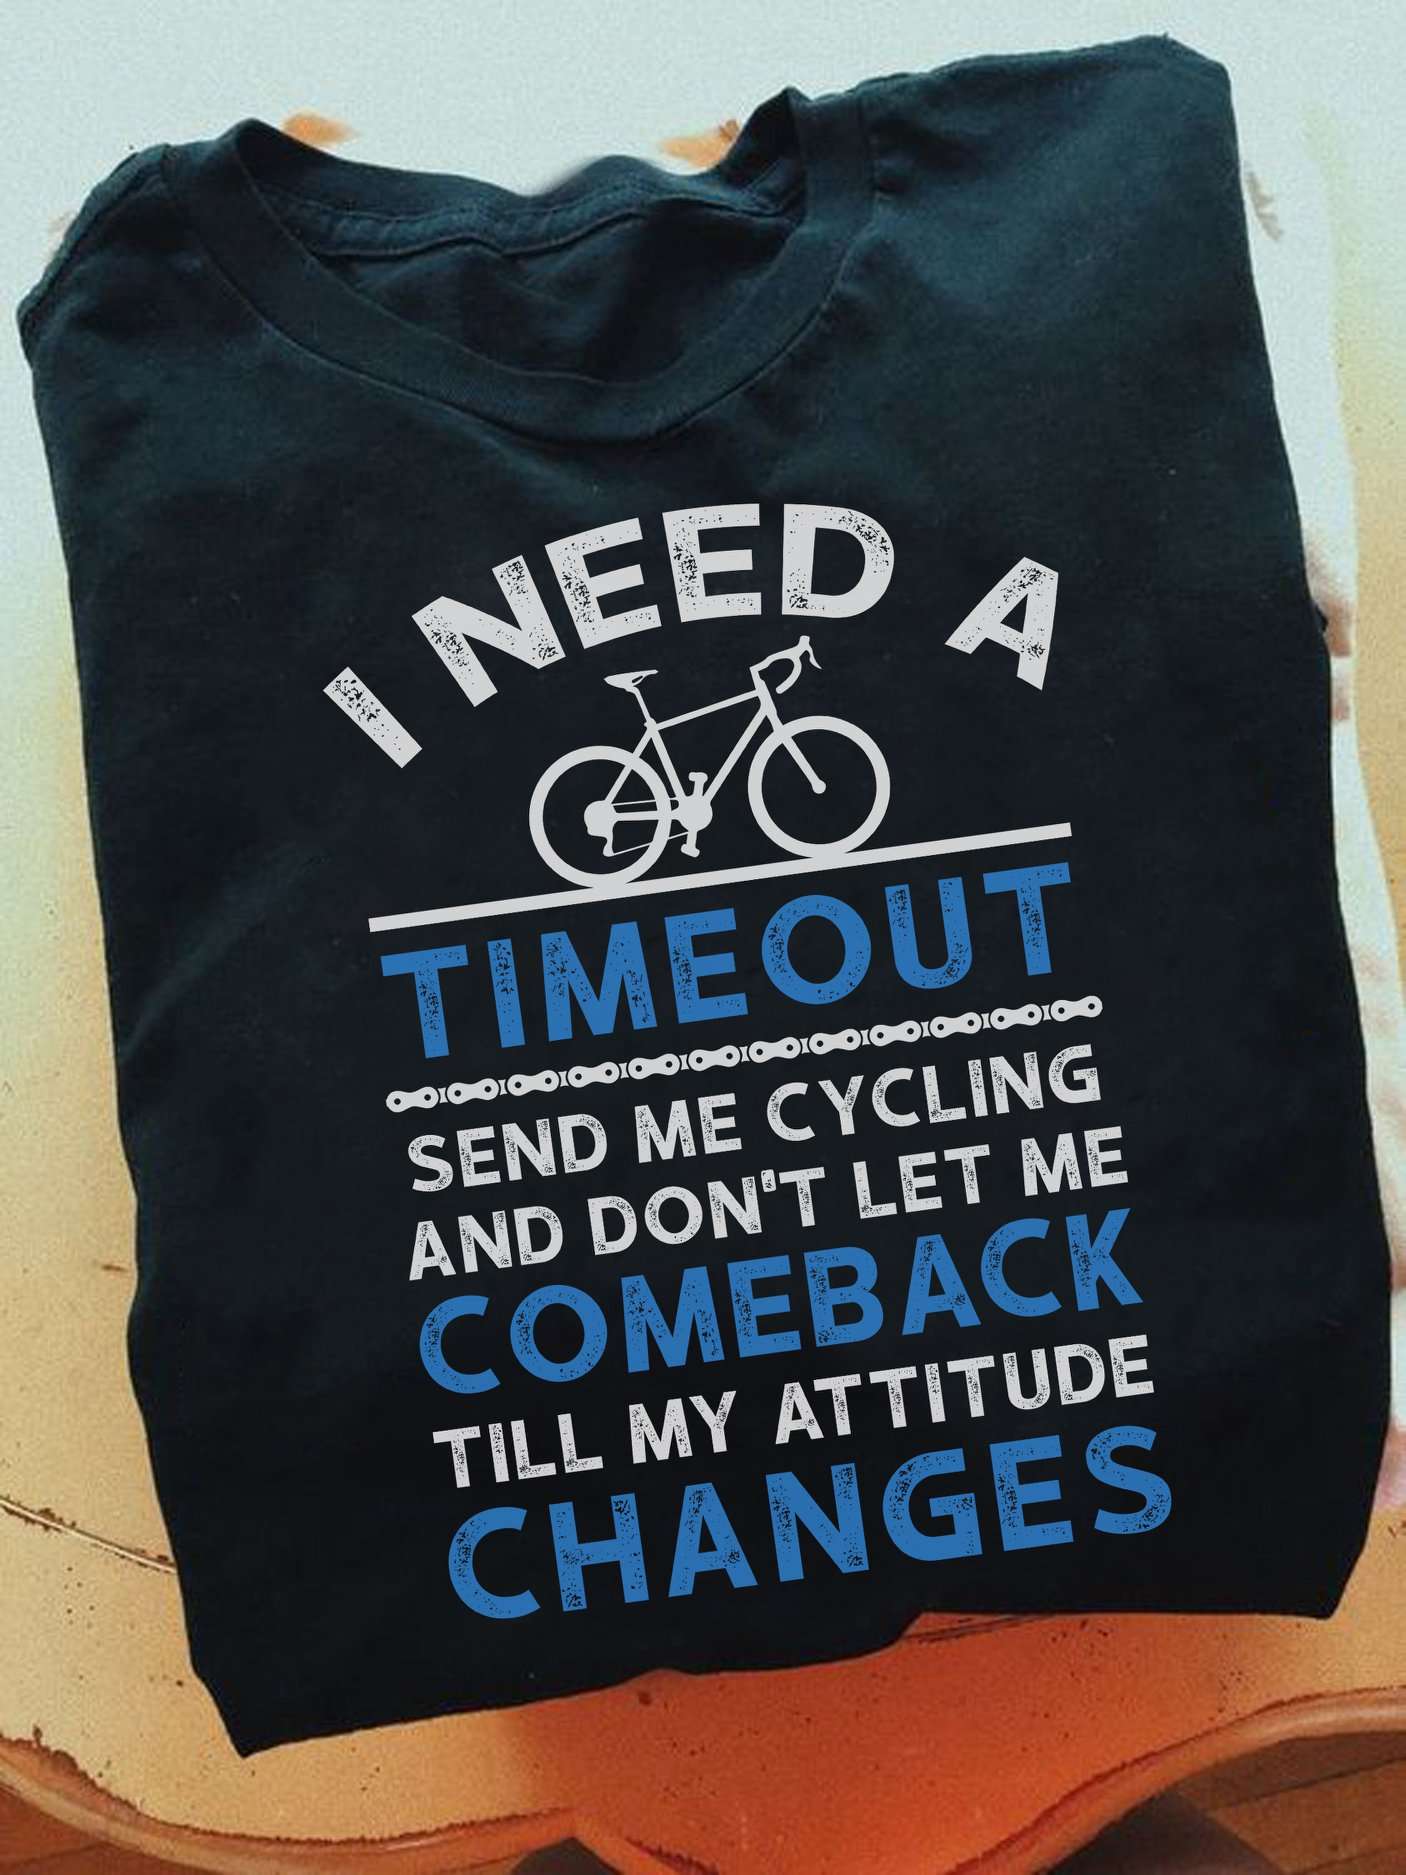 I need a timeout send me cycling and don't let me comeback till my attitude changes - Love riding bicycle